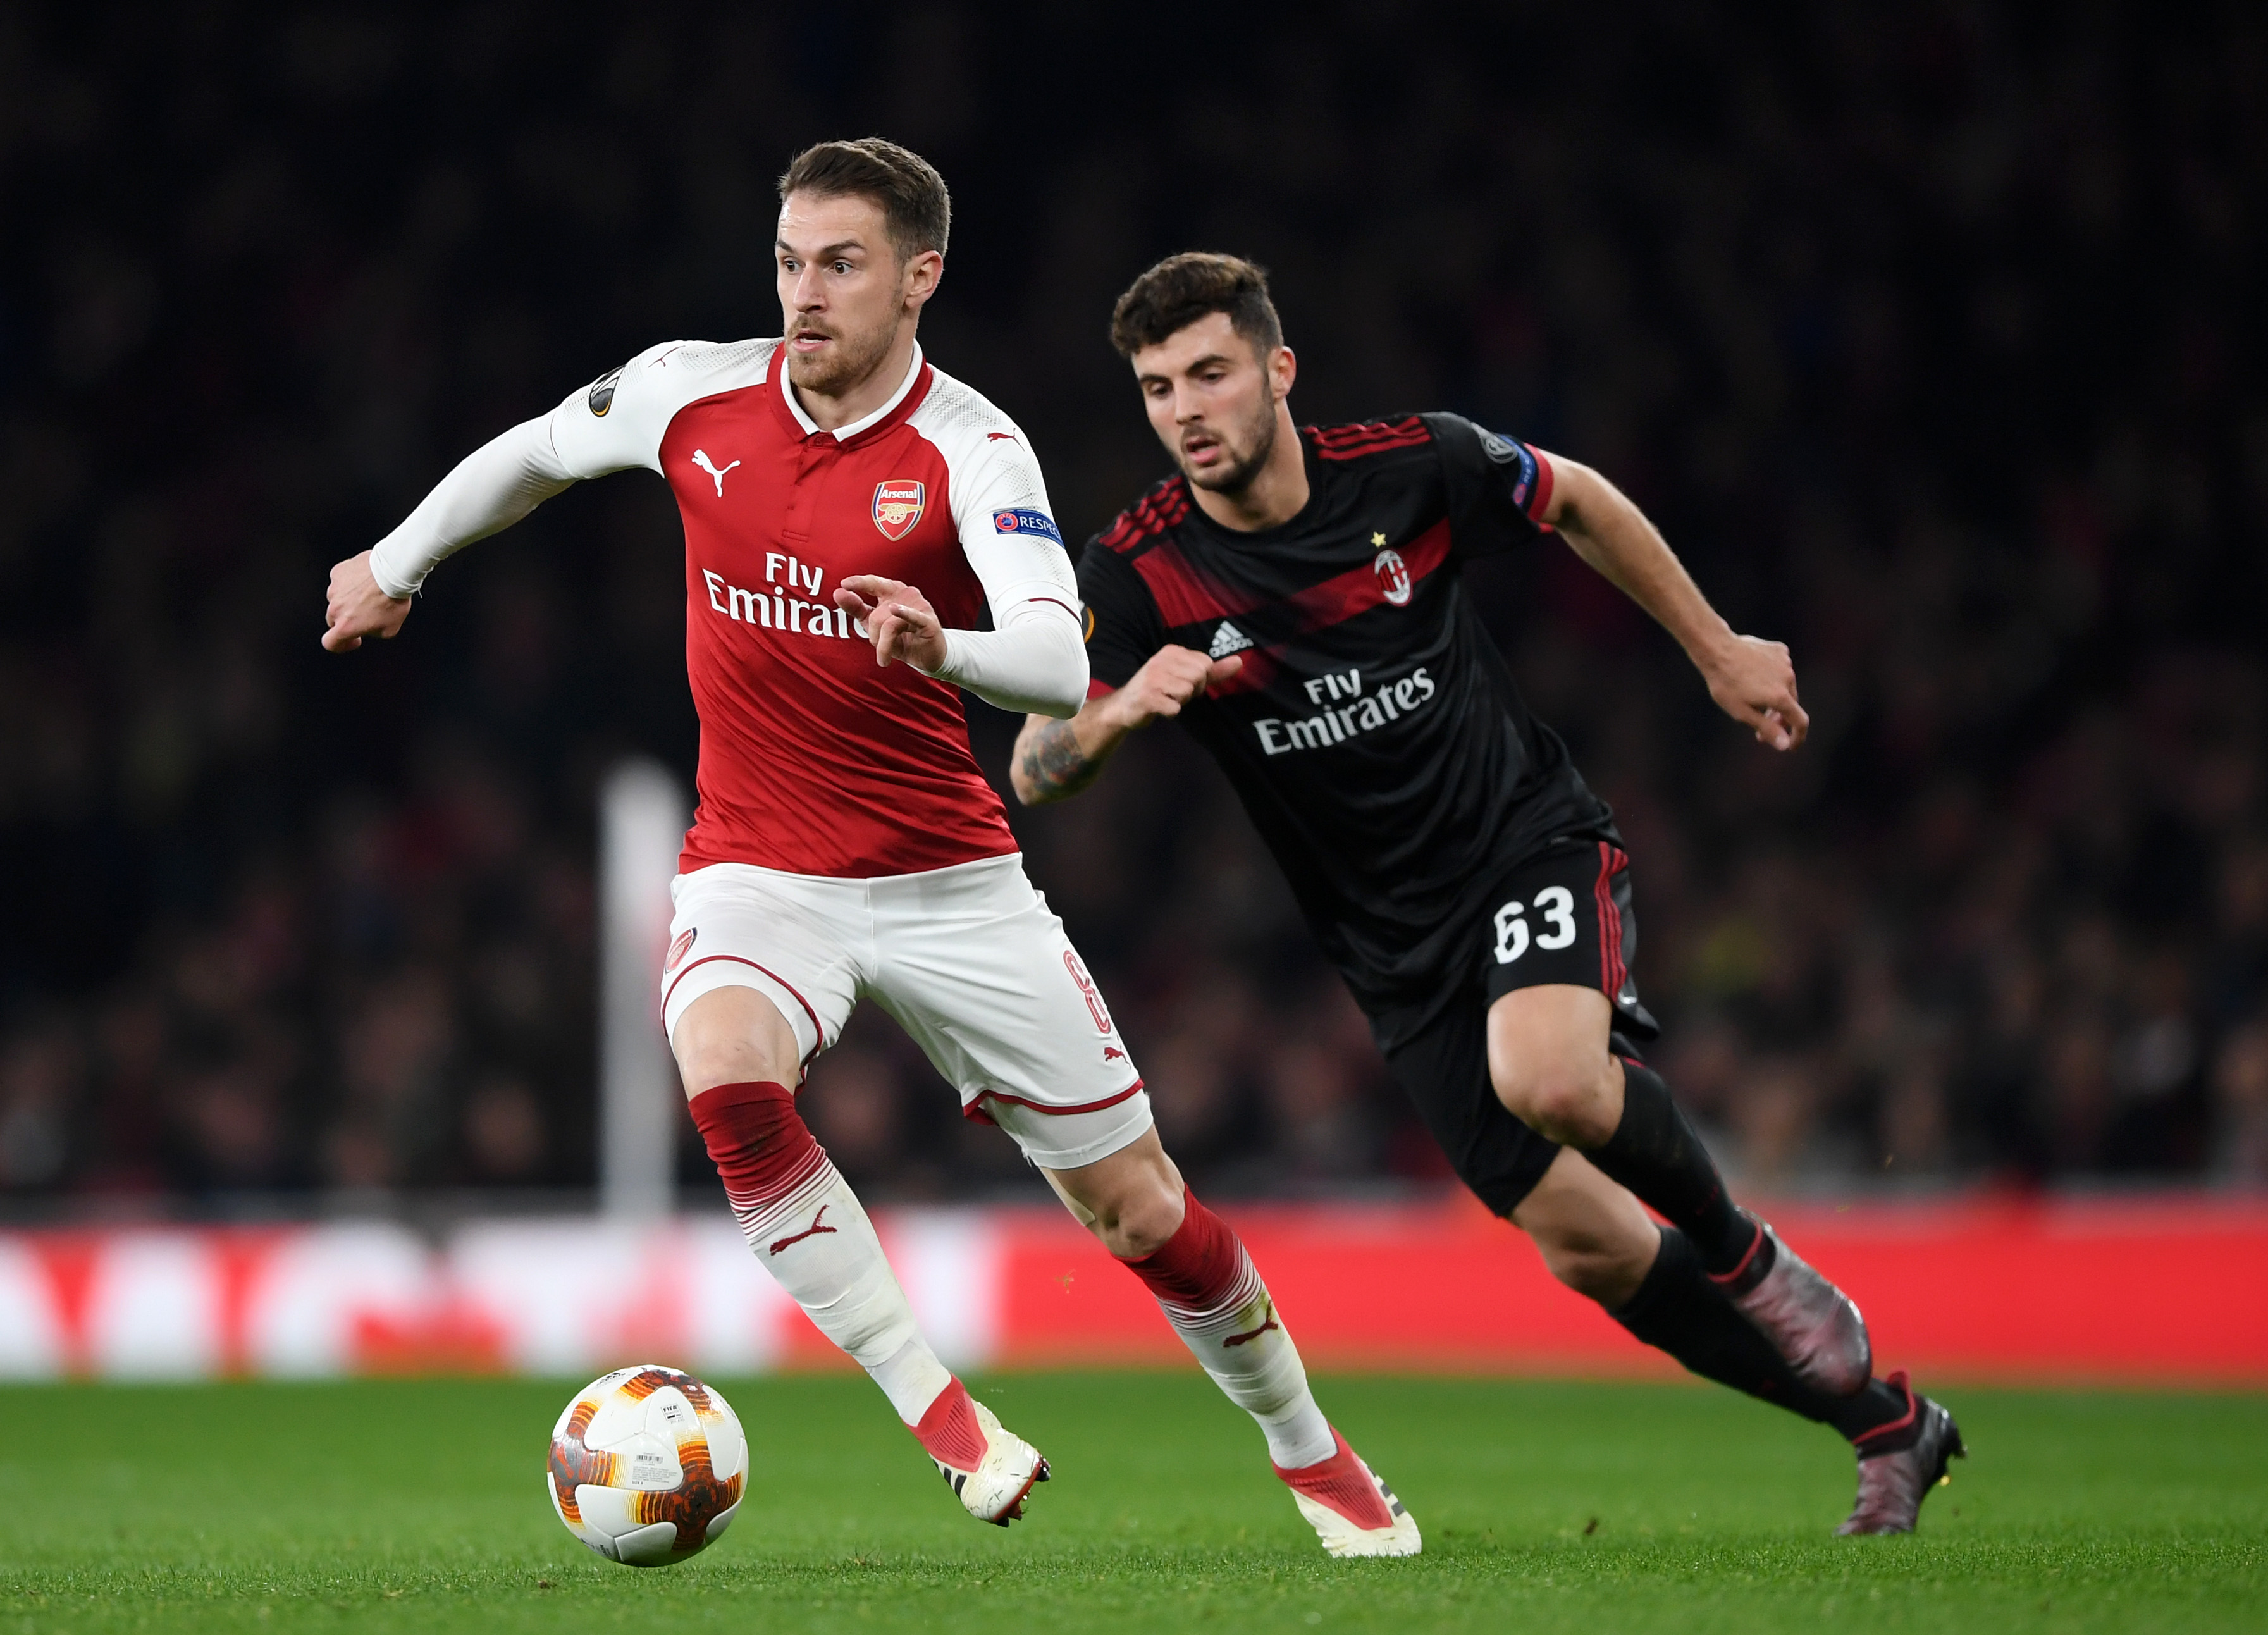 LONDON, ENGLAND - MARCH 15:  Aaron Ramsey of Arsenal breaks from Patrick Cutrone of AC Milan during the UEFA Europa League Round of 16 Second Leg match between Arsenal and AC Milan at Emirates Stadium on March 15, 2018 in London, England.  (Photo by Shaun Botterill/Getty Images)